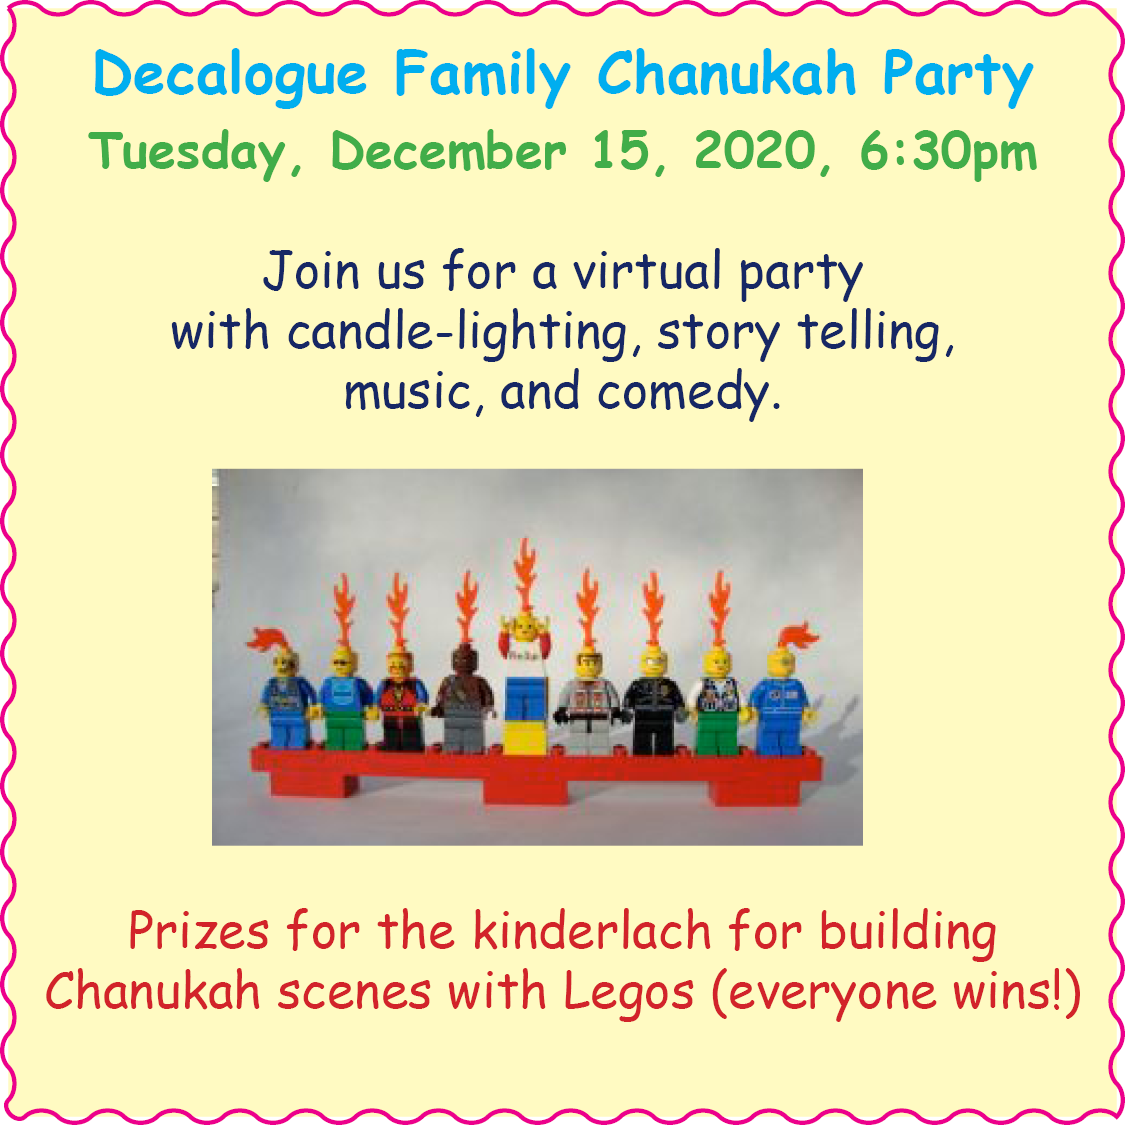 Decalogue Family Chanukah Party